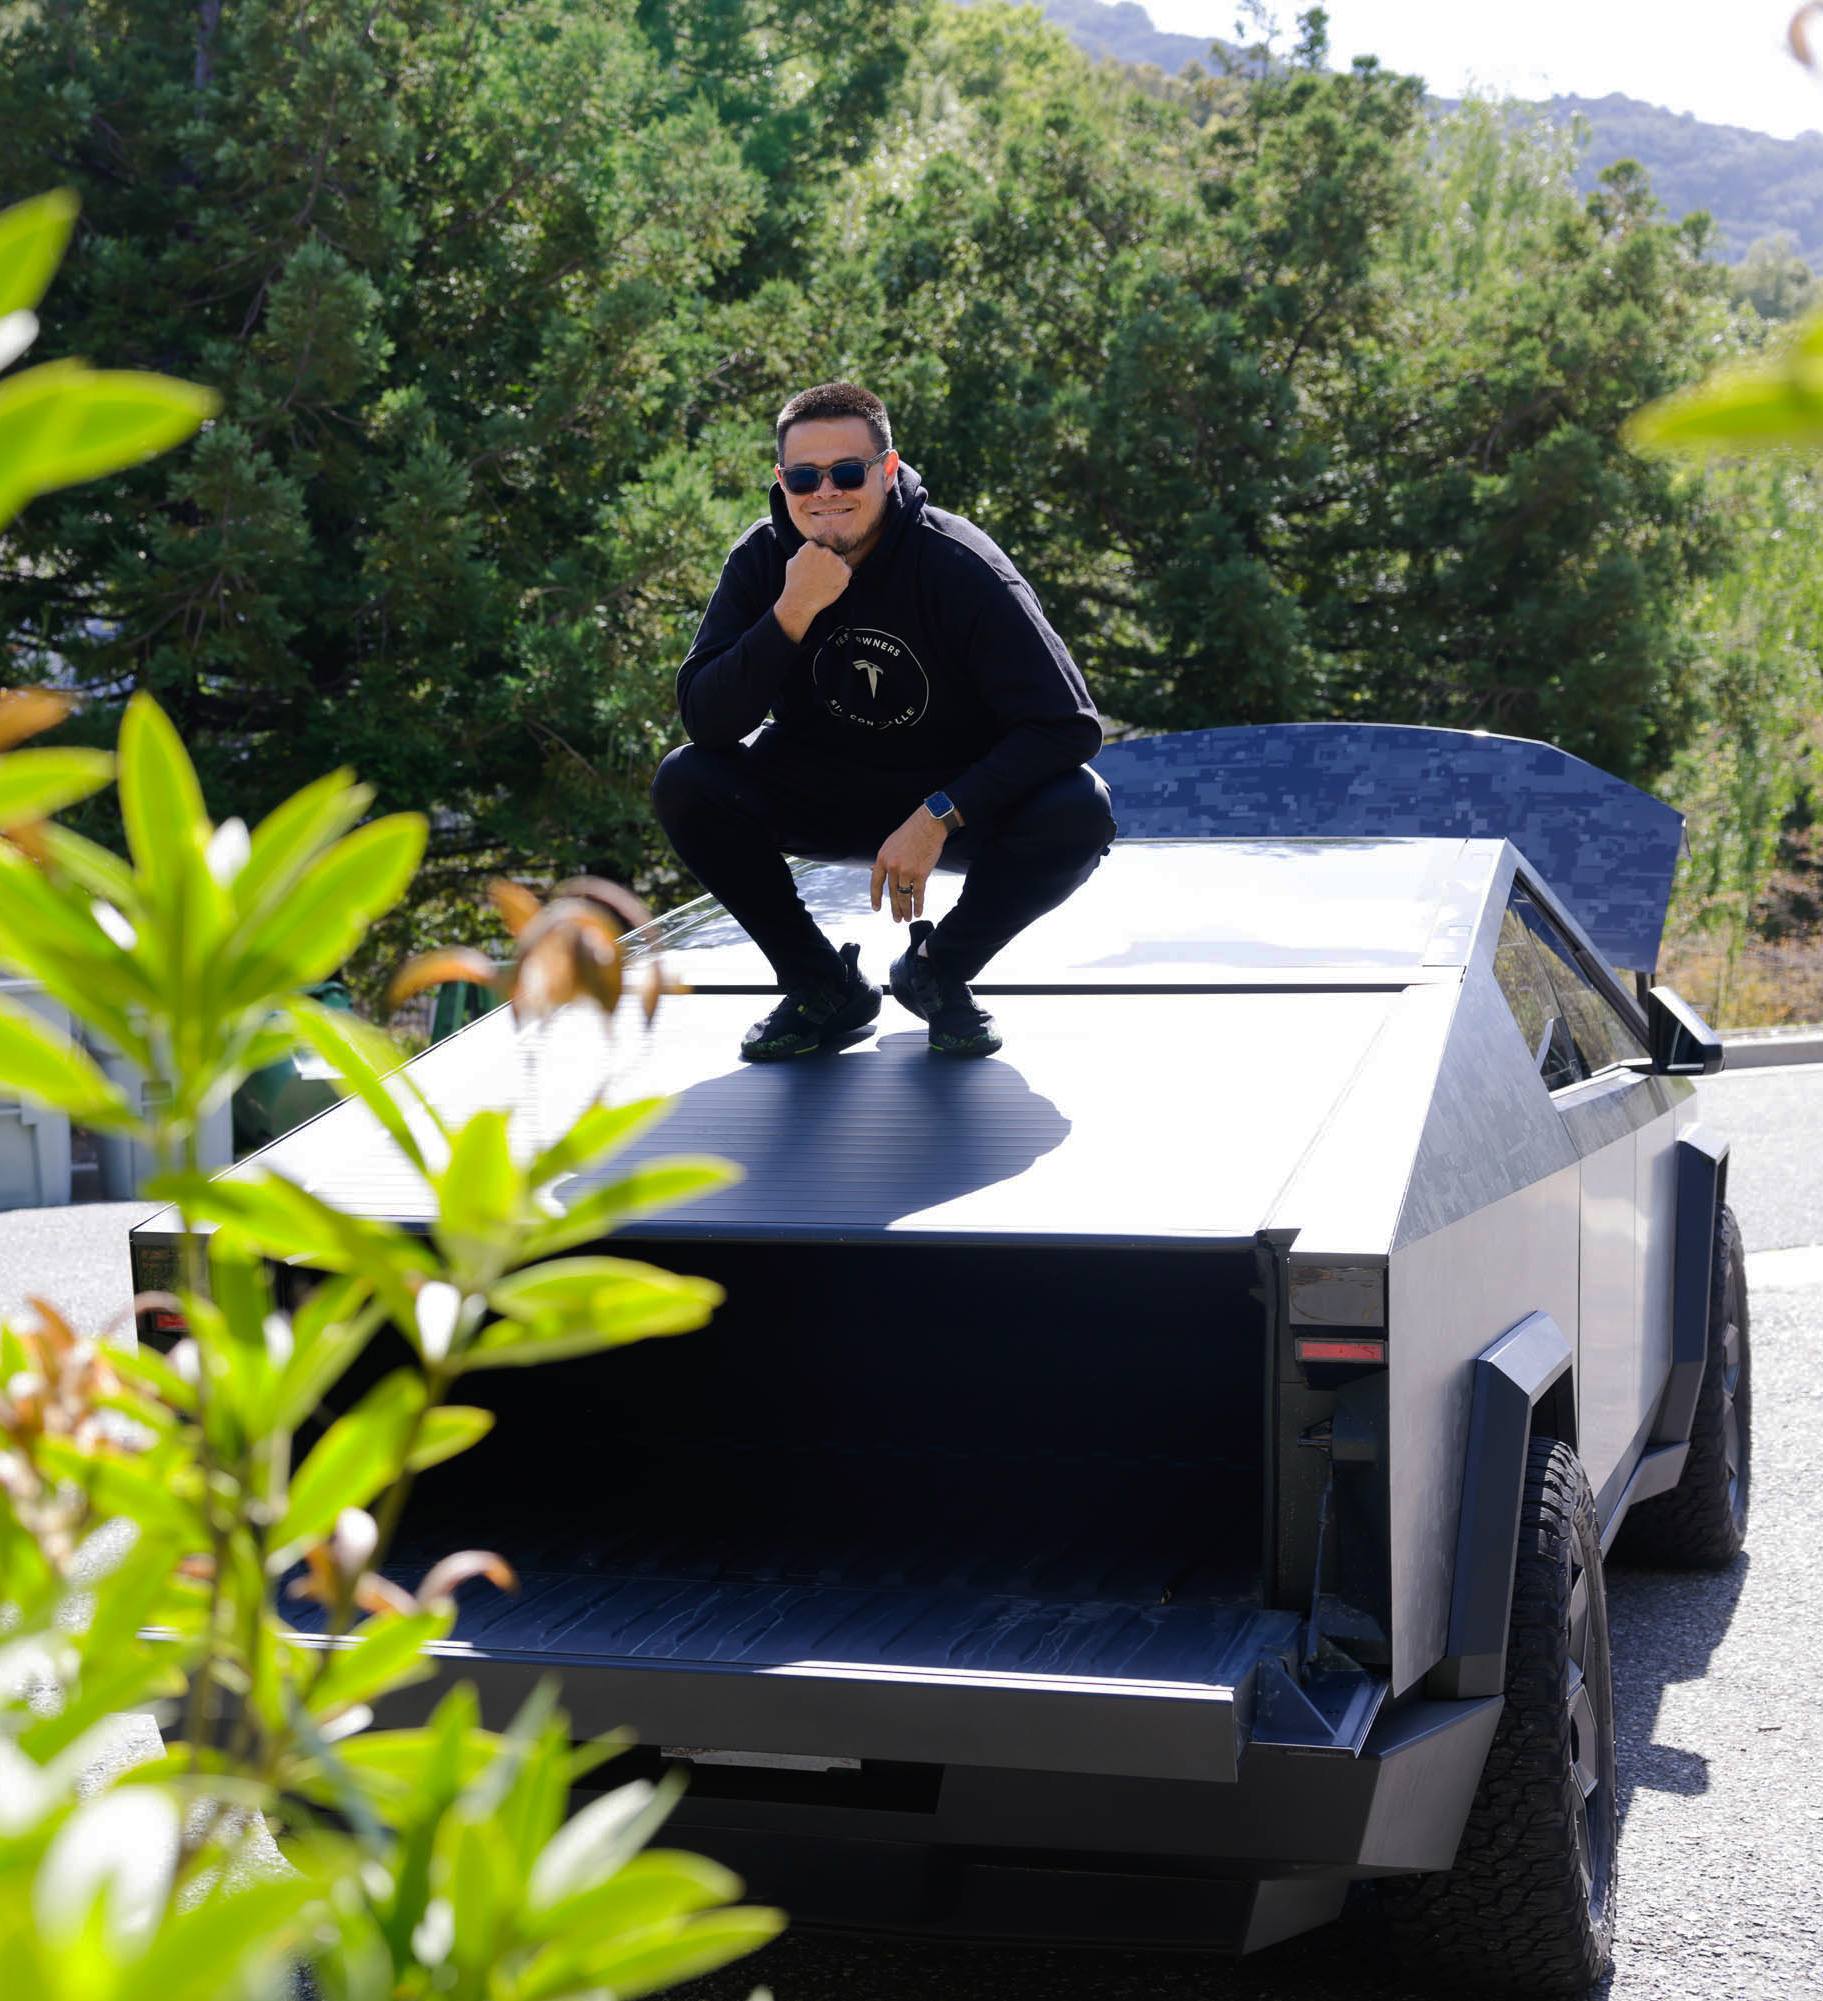 A person is squatting on top of a futuristic silver truck, wearing a black outfit and sunglasses, surrounded by greenery.